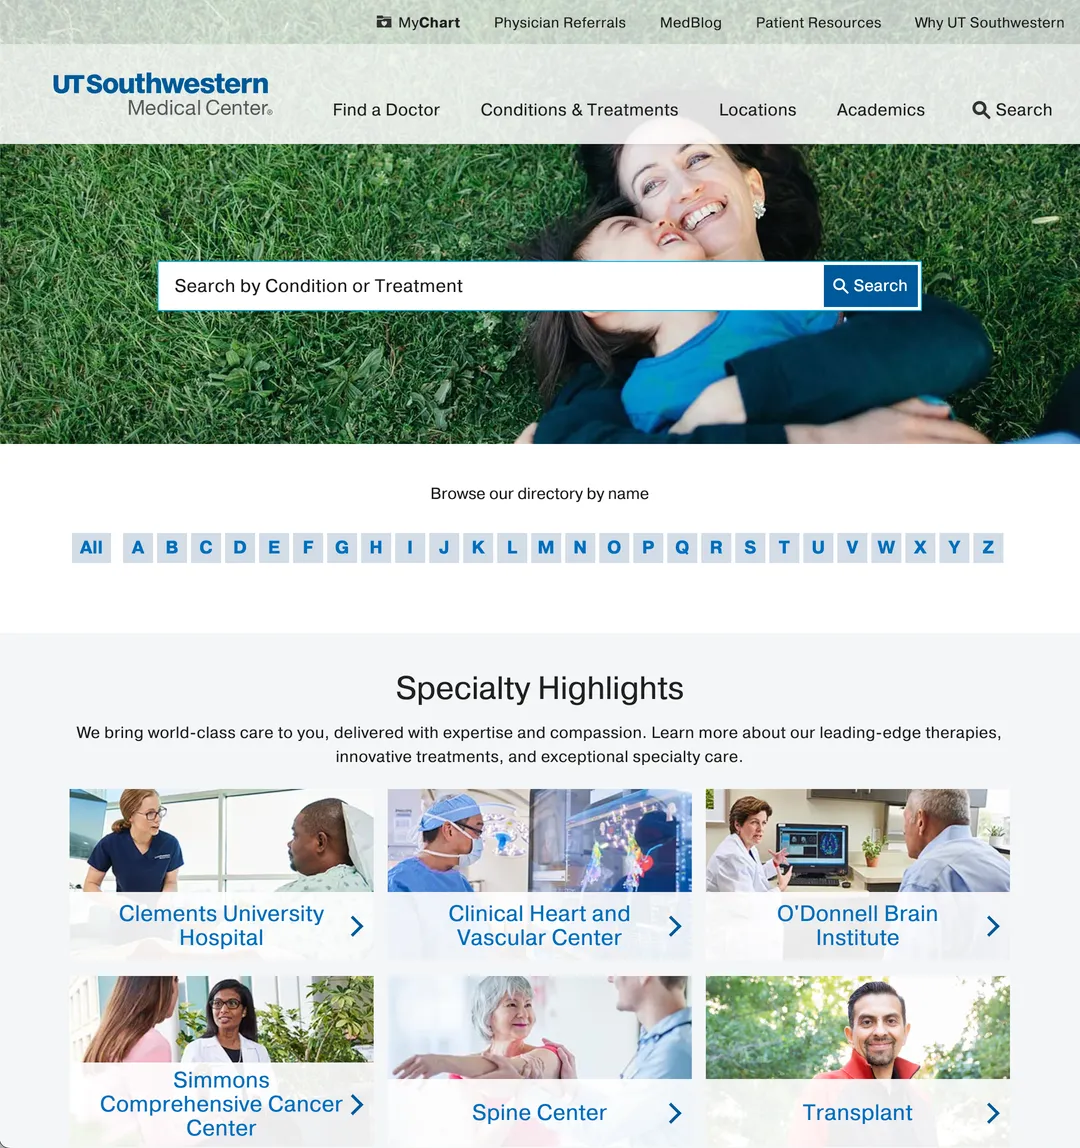 UT Southwestern Medical Center conditions and treatments